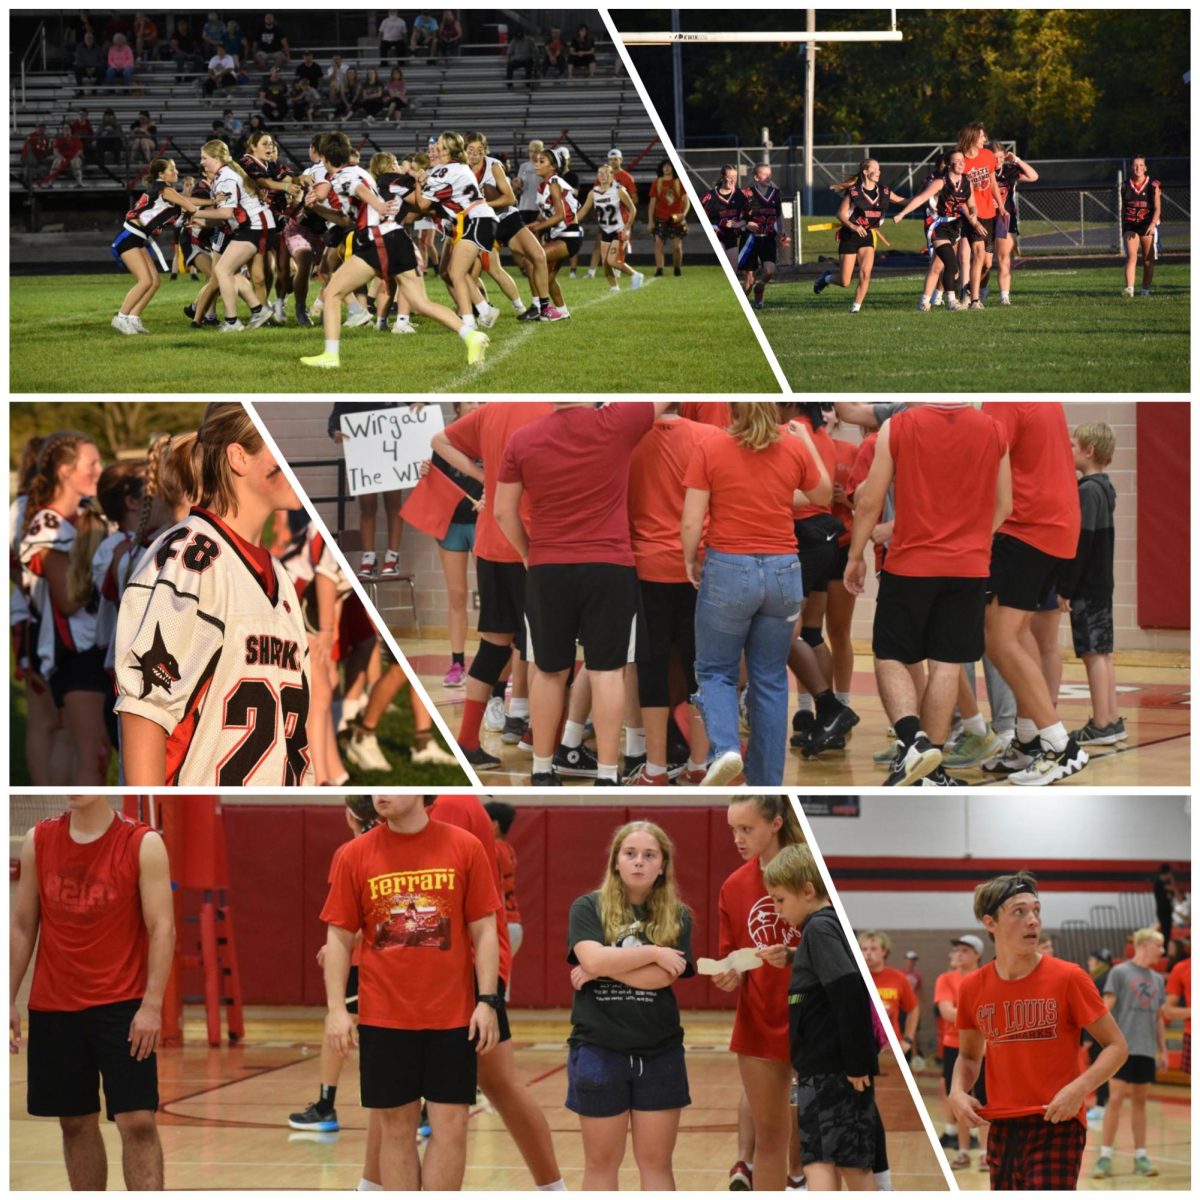 Powderpuff+and+volleybuff+are+incredibly+important+events+in+SLHS+Homecoming+culture.+